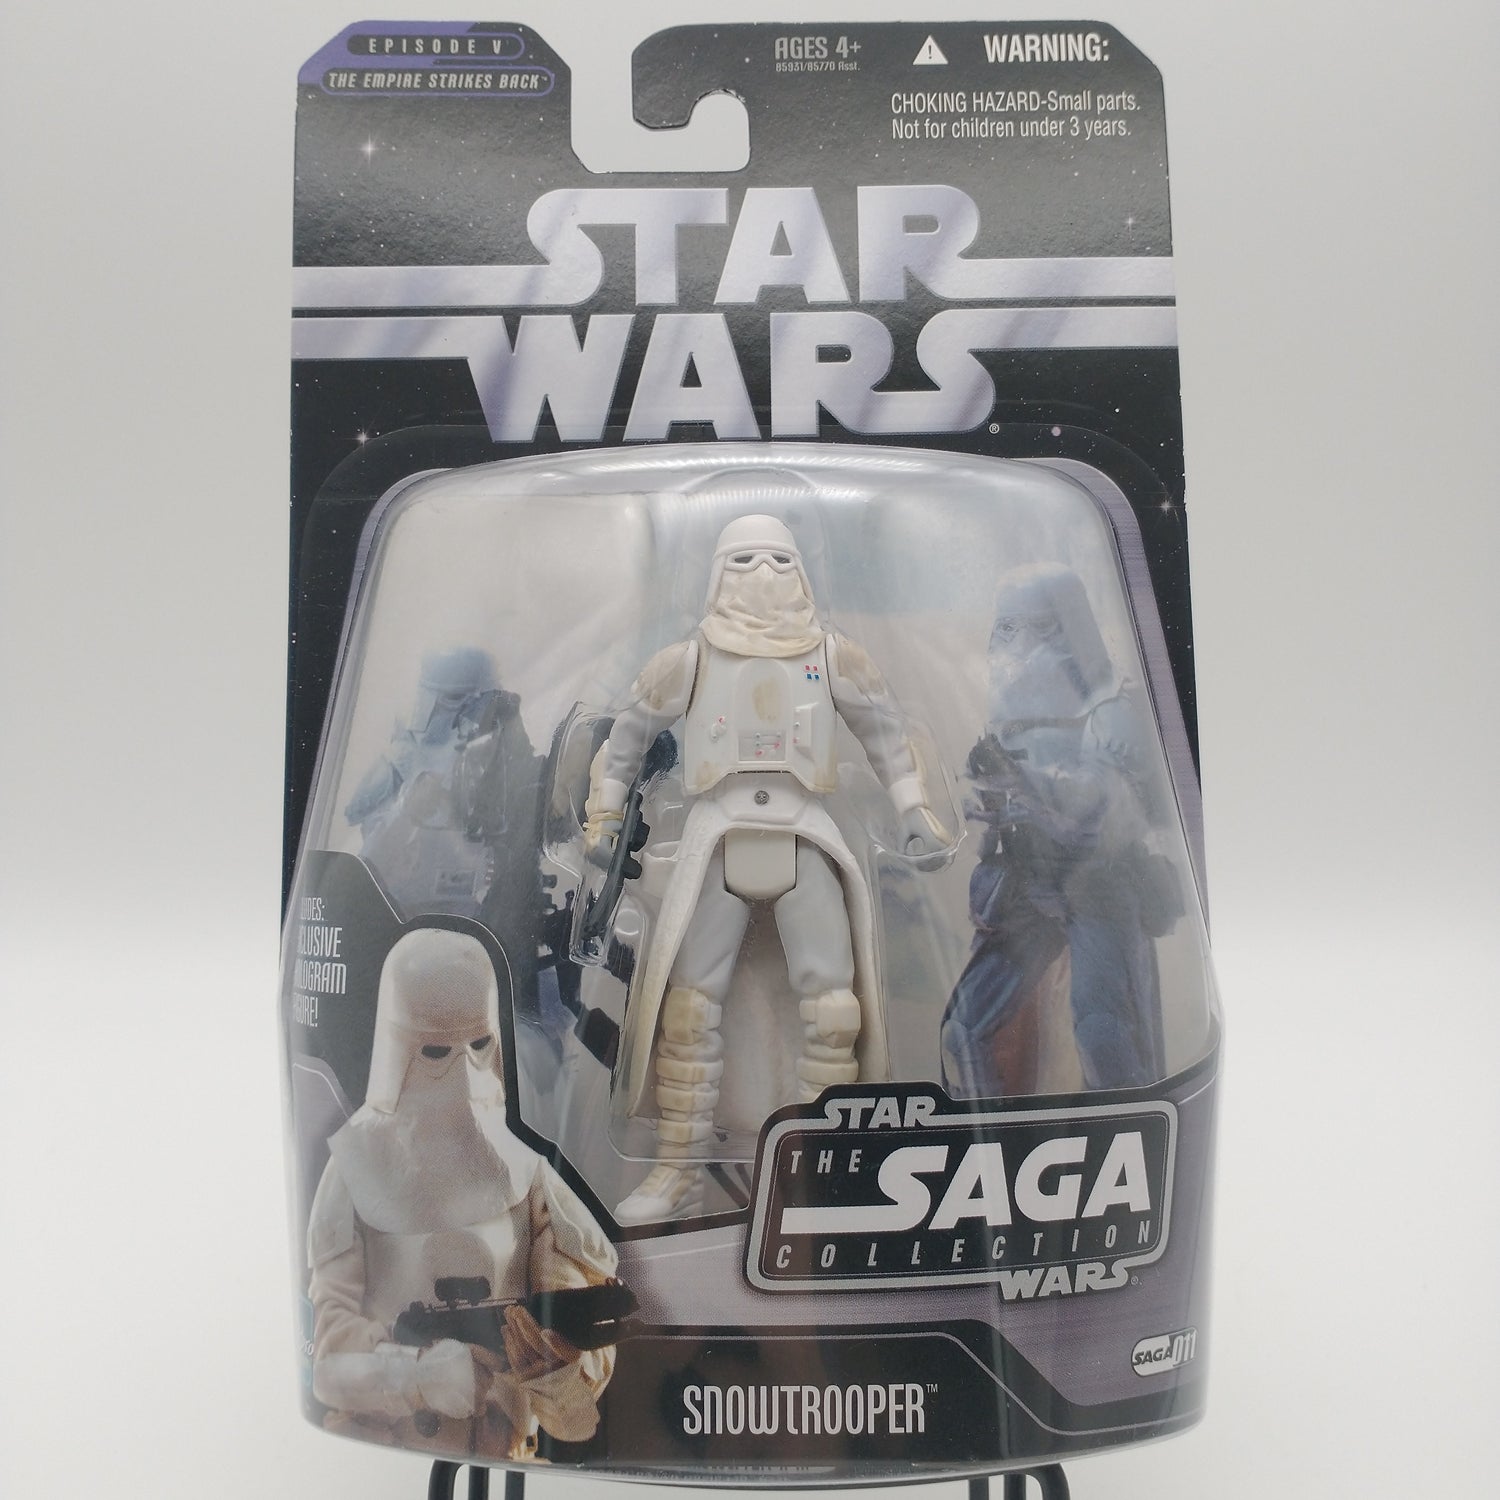 The front of the card and bubble. The bubble is in good condition, the figure inside is a snowtrooper wearing white combat armor.